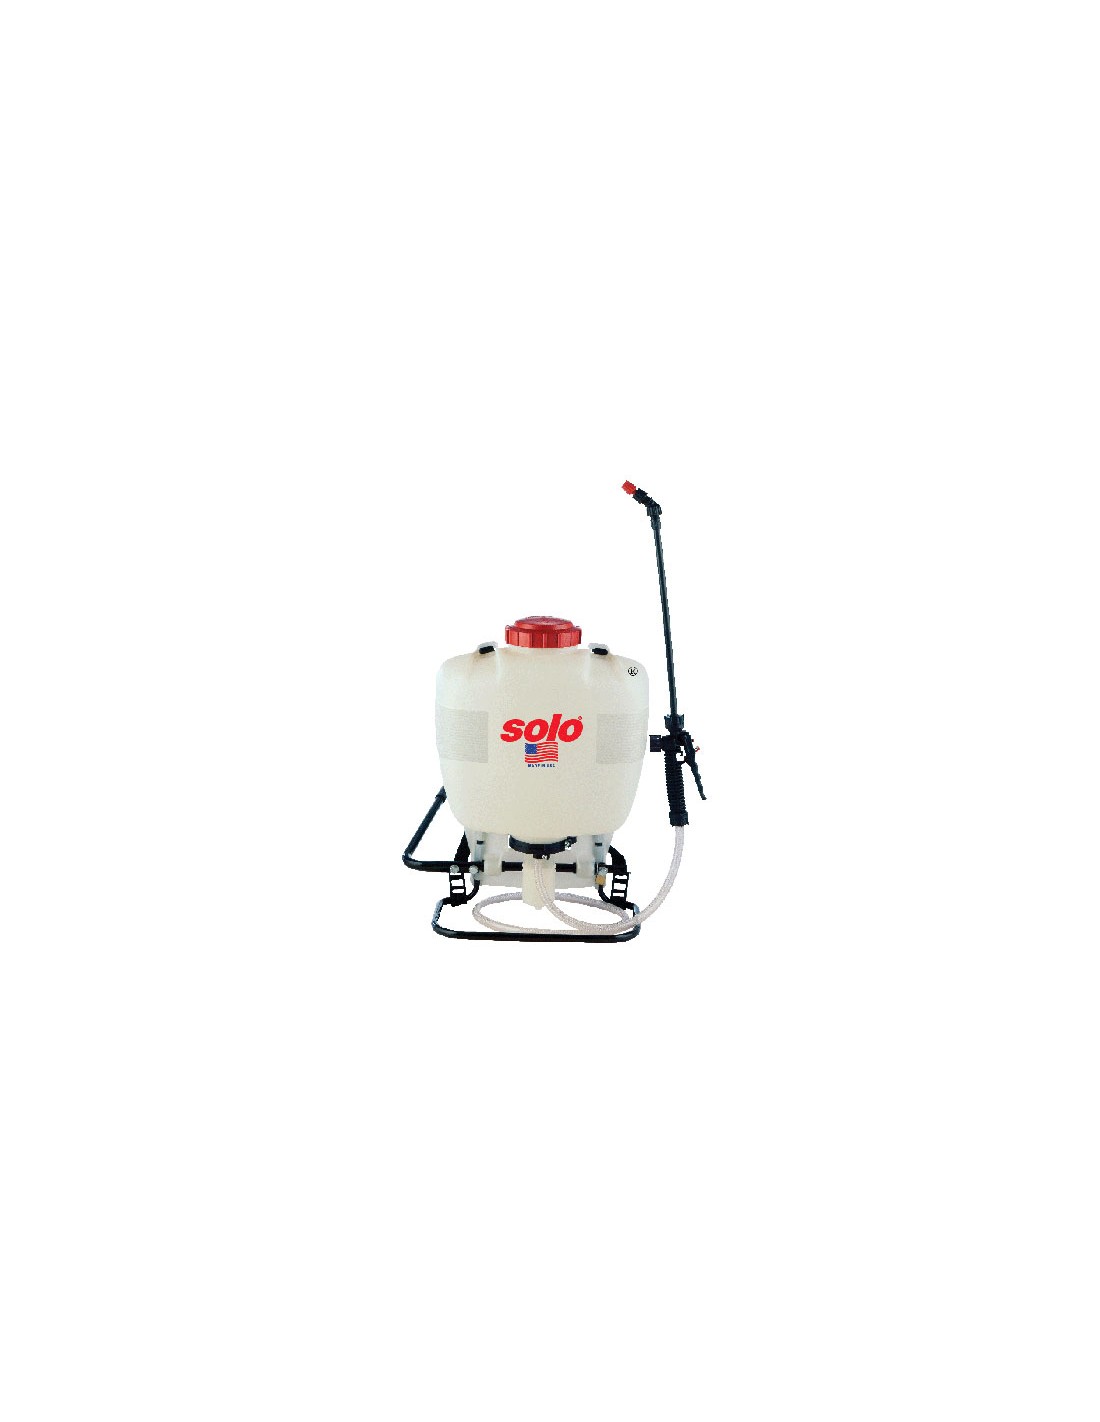 Solo Back Pack Sprayer 425 Questions & Answers